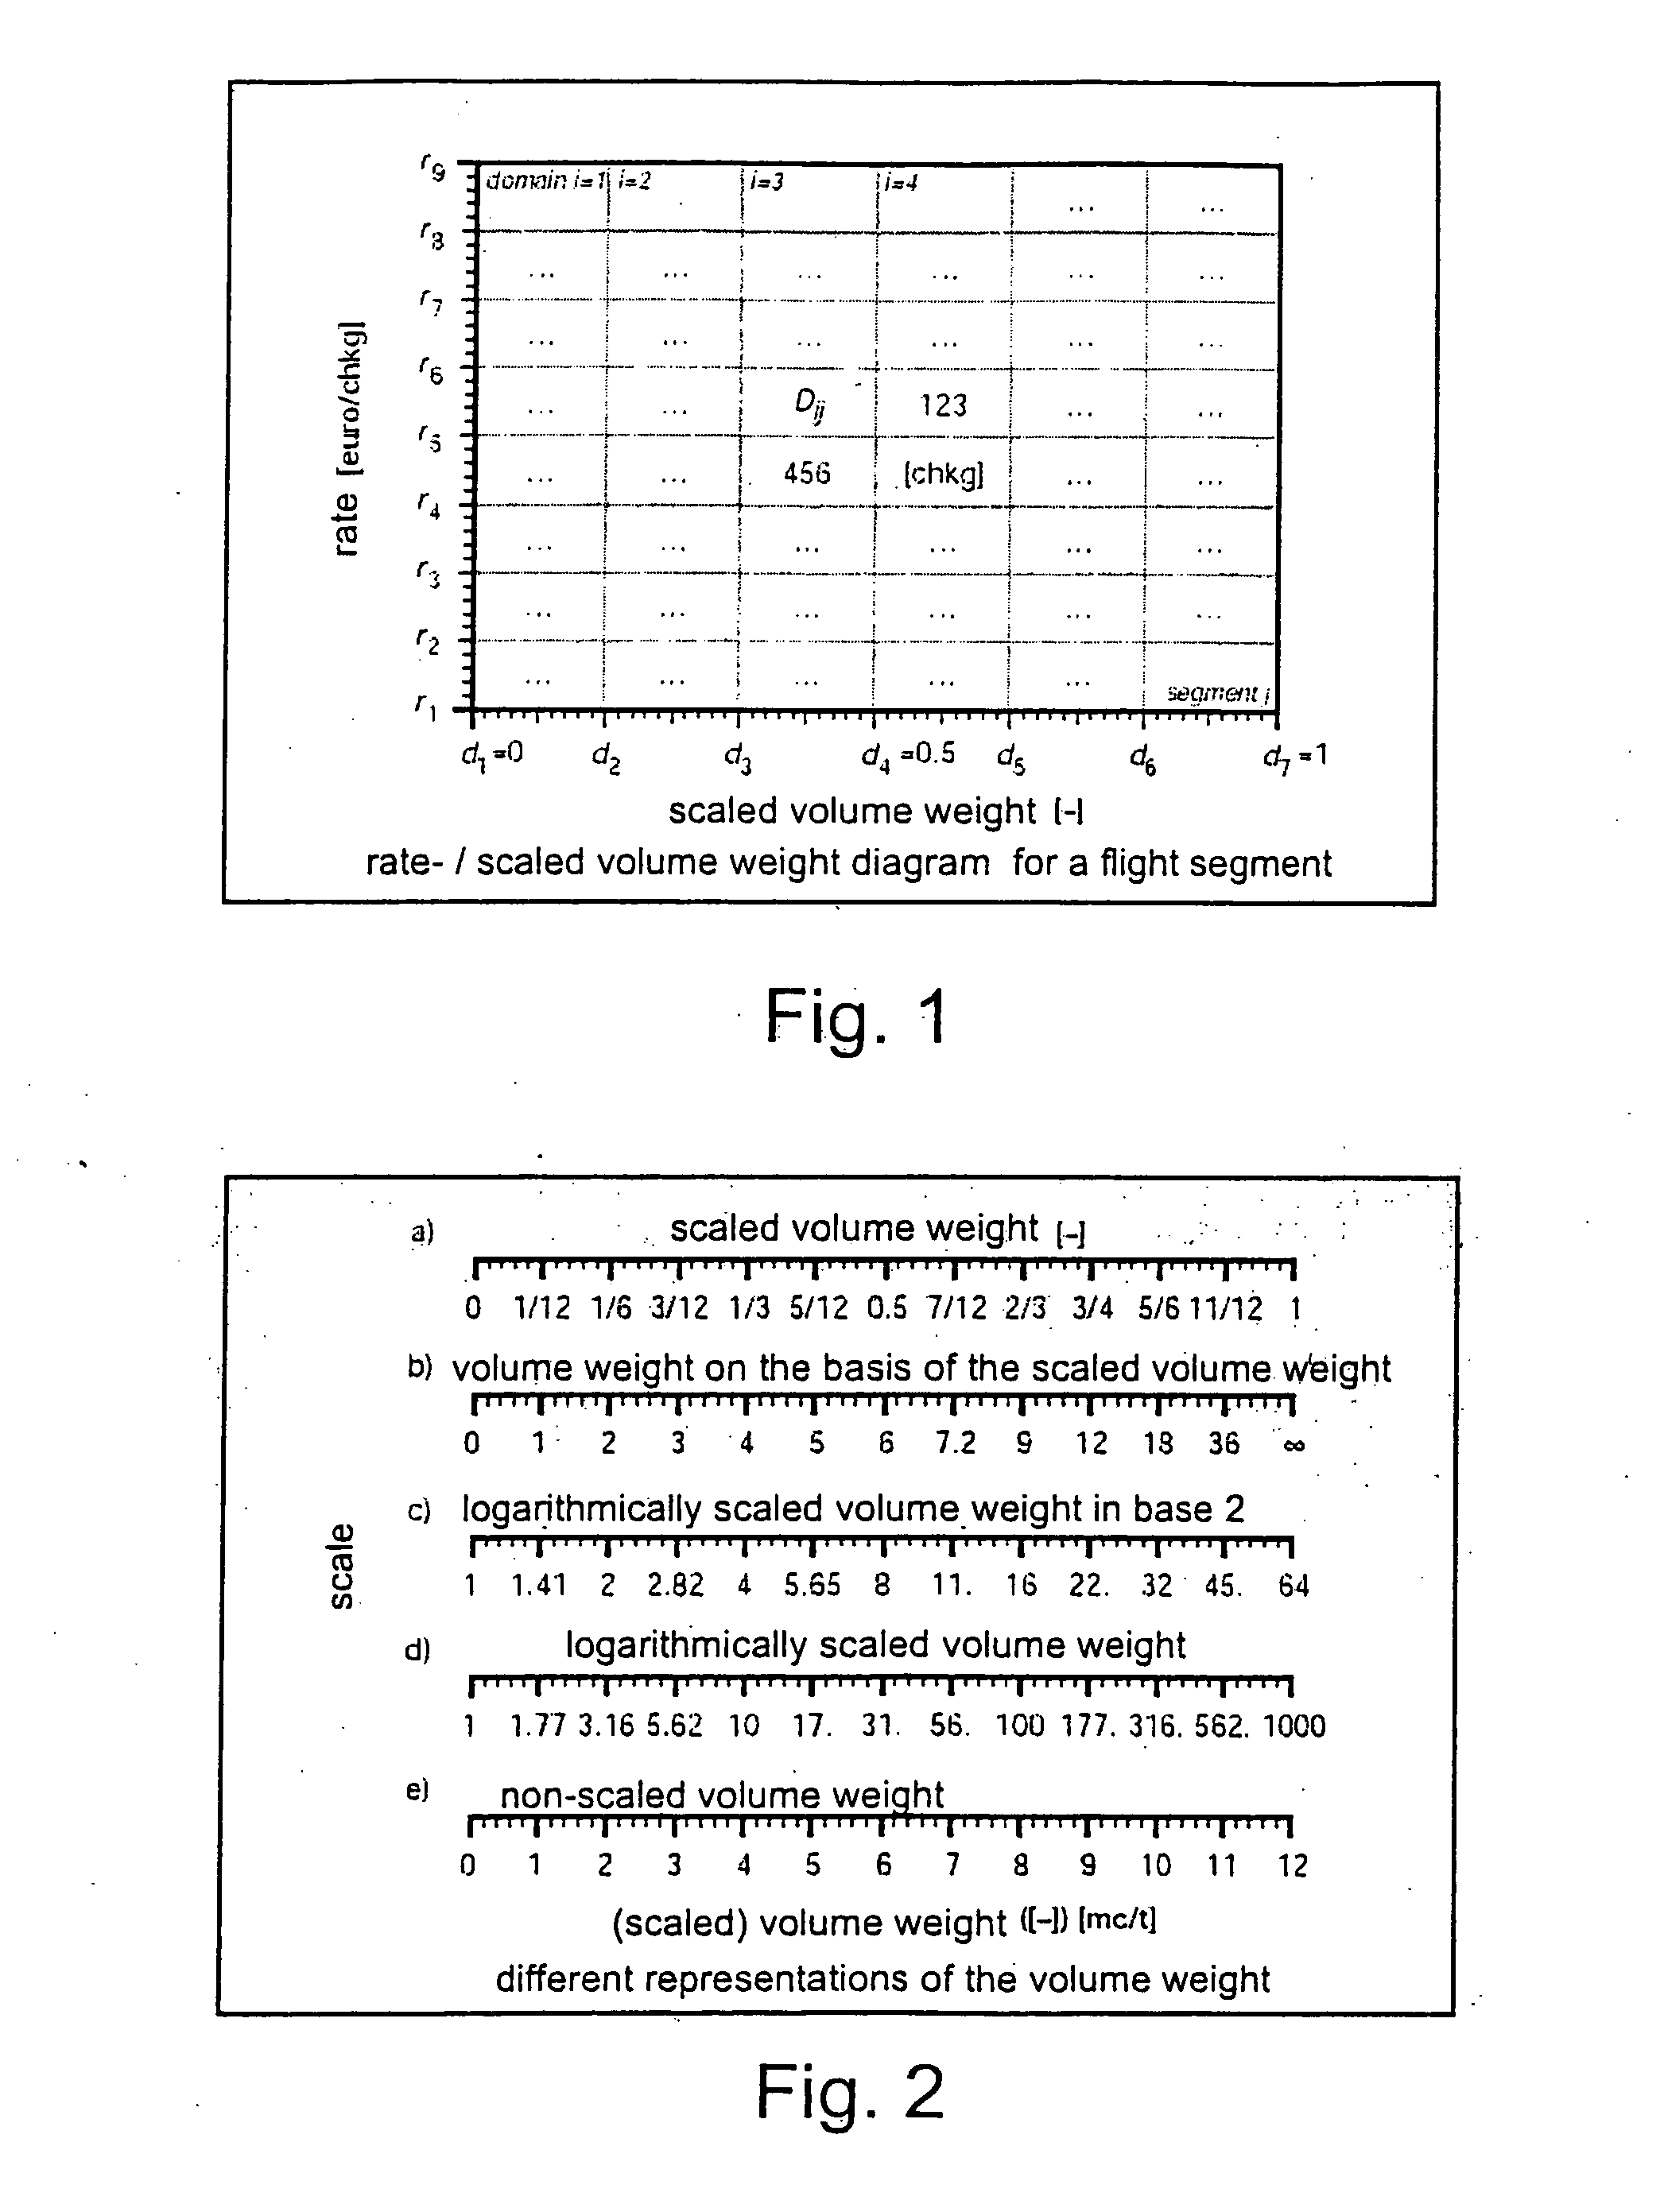 System and method for optimizing the utilization of a cargo space and for maximizing the revenue from a cargo transport